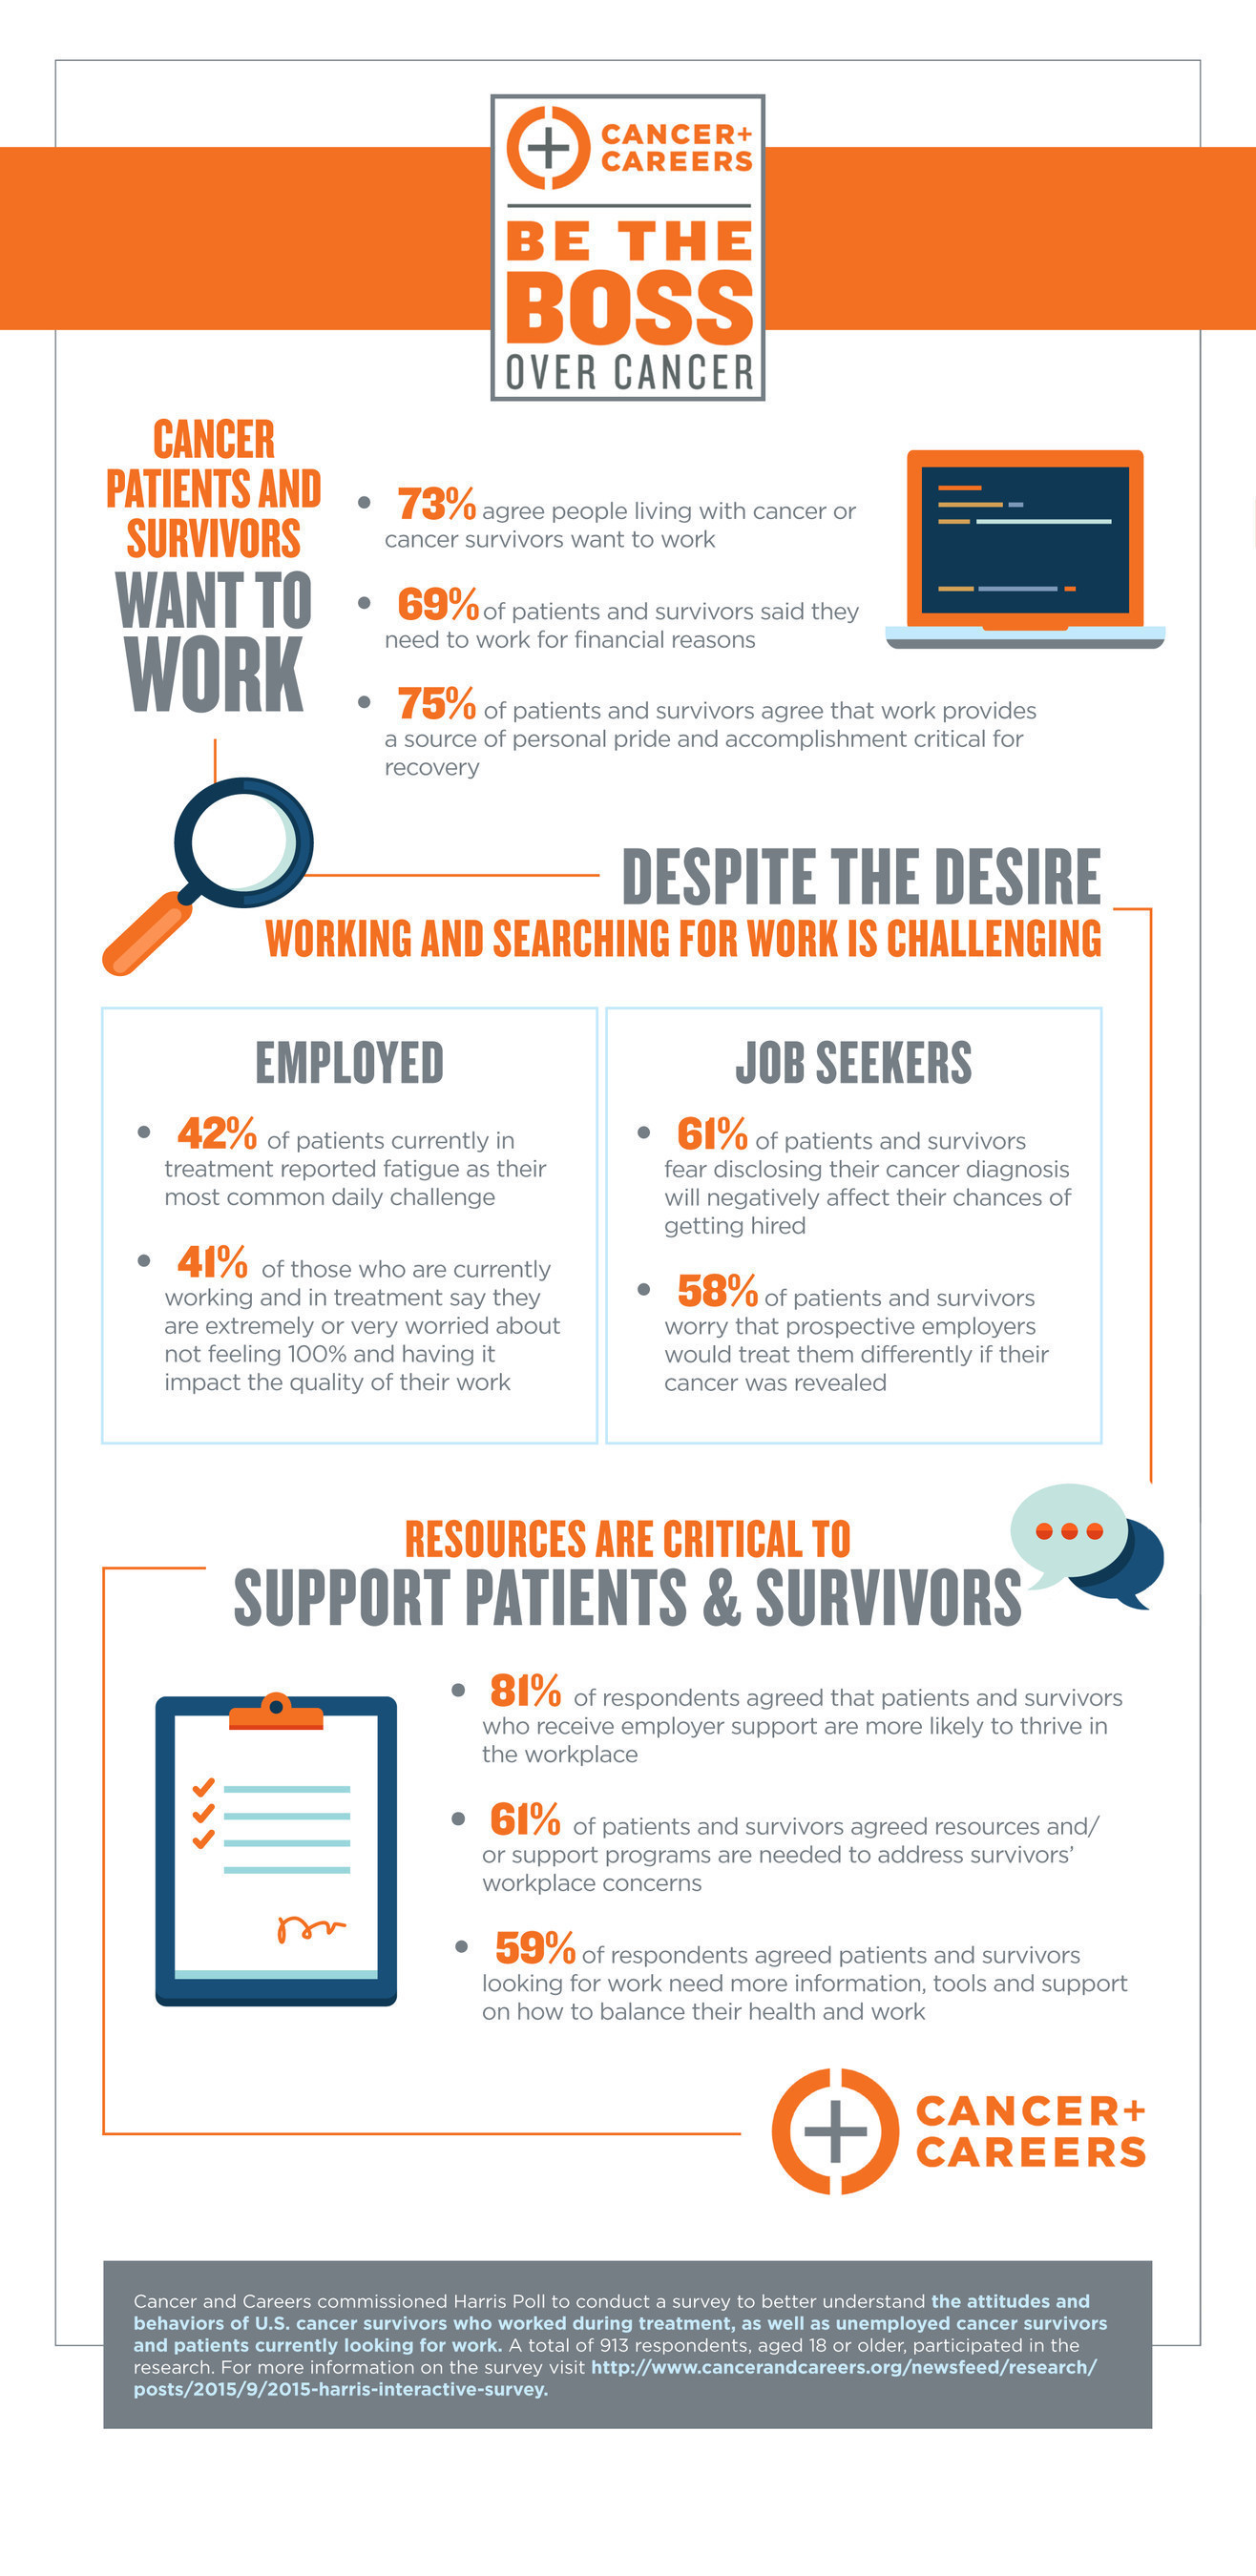 Cancer patients and survivors want to work, despite challenges.